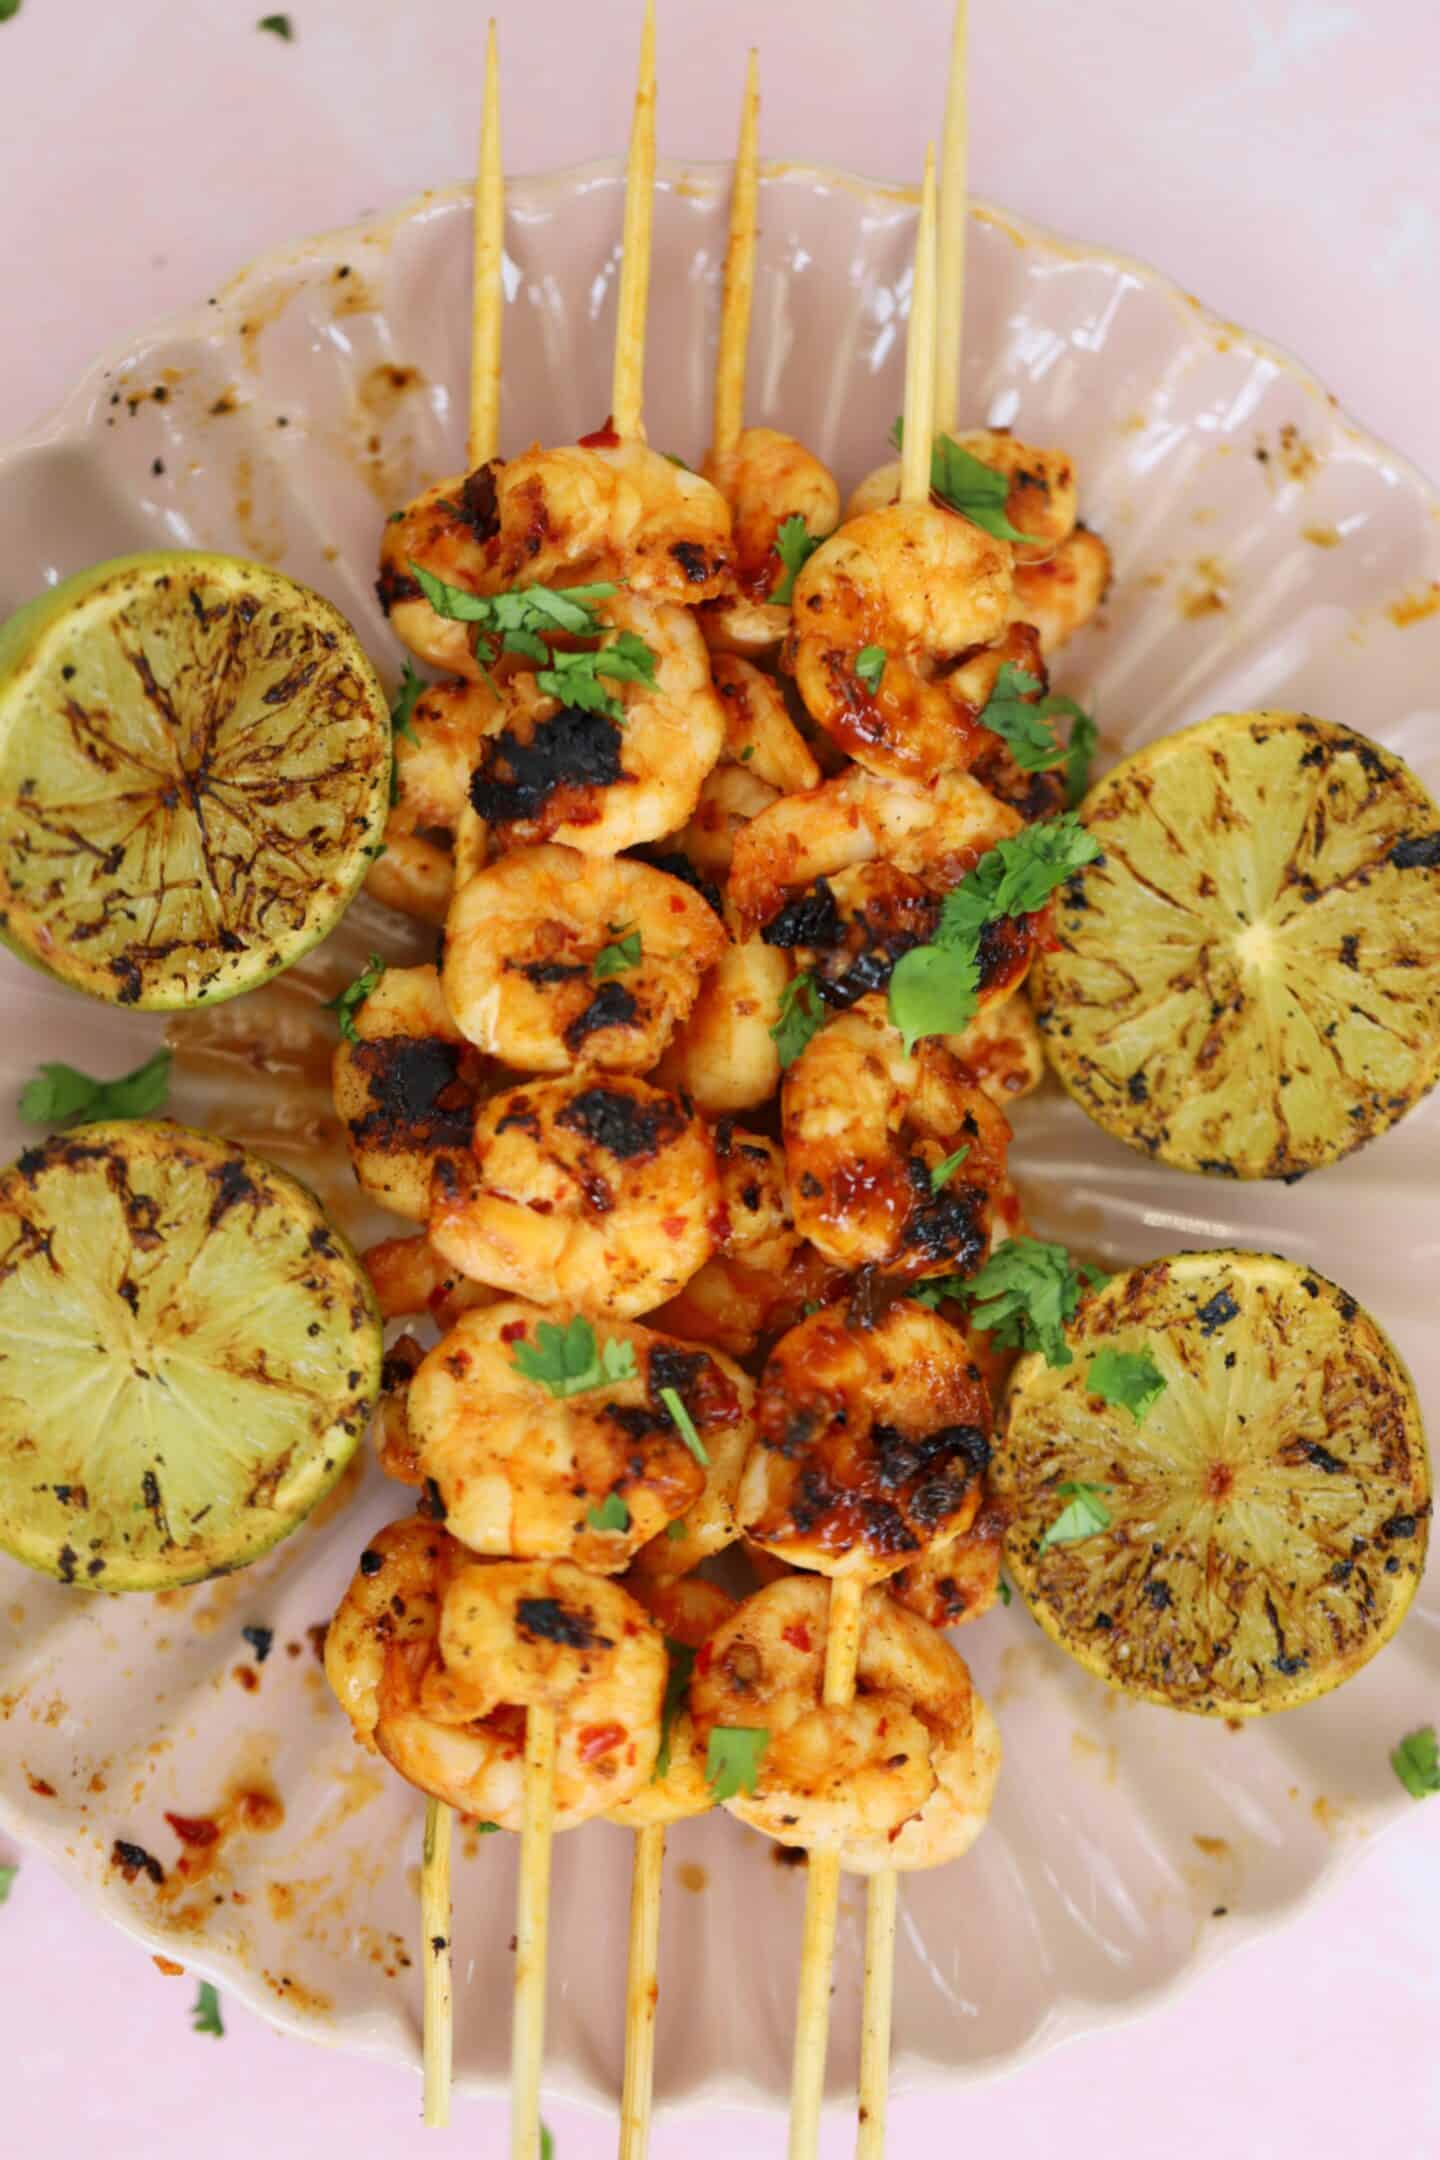 King prawn kebabs on a plate with lime wedges.